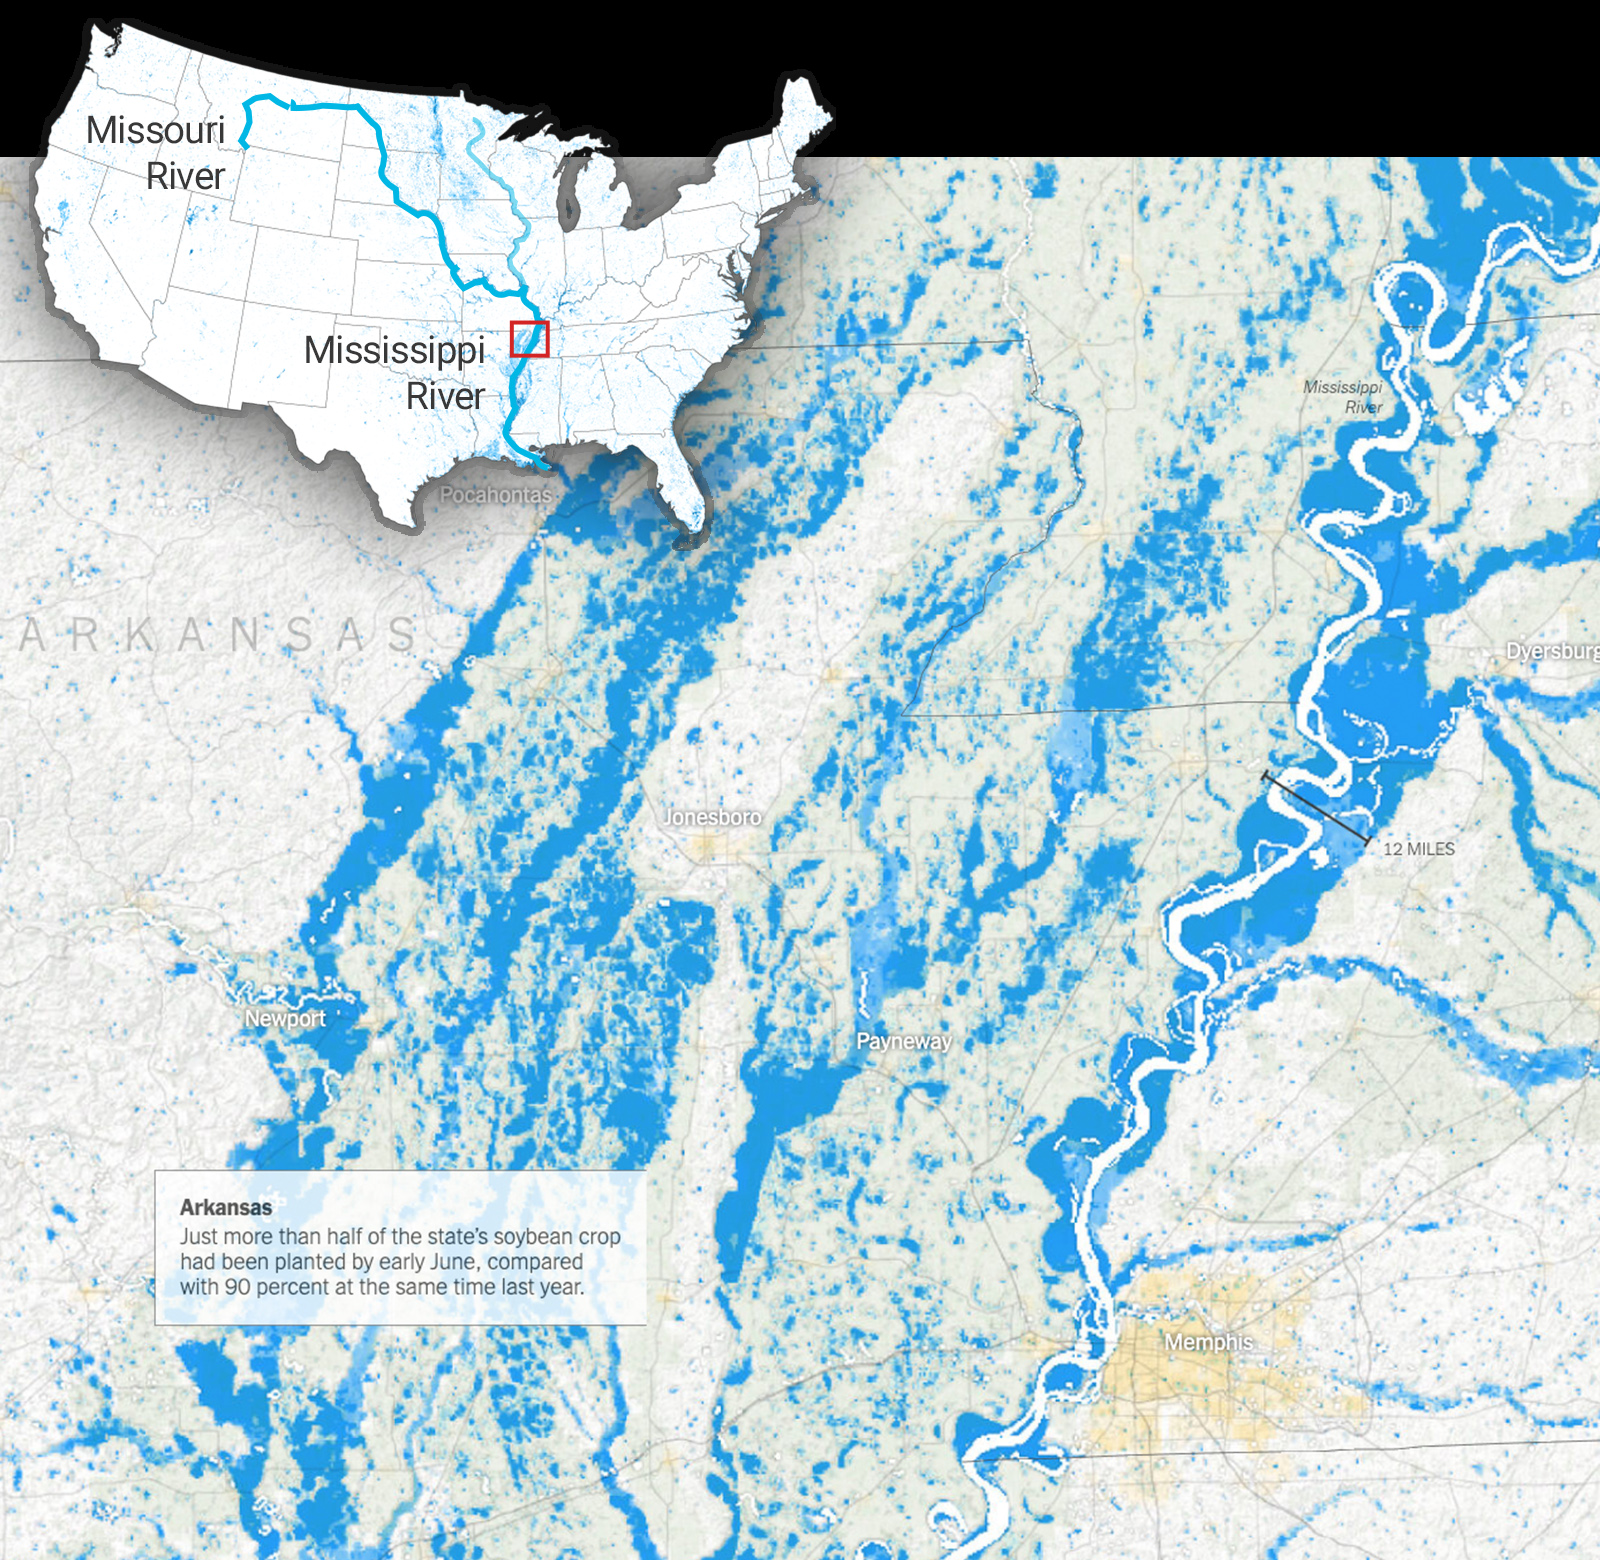 A satellite image of Missouri shows floodwaters in bright blue. In the upper left corner, a map of the U.S. shows the part of the flood area depicted in this image.